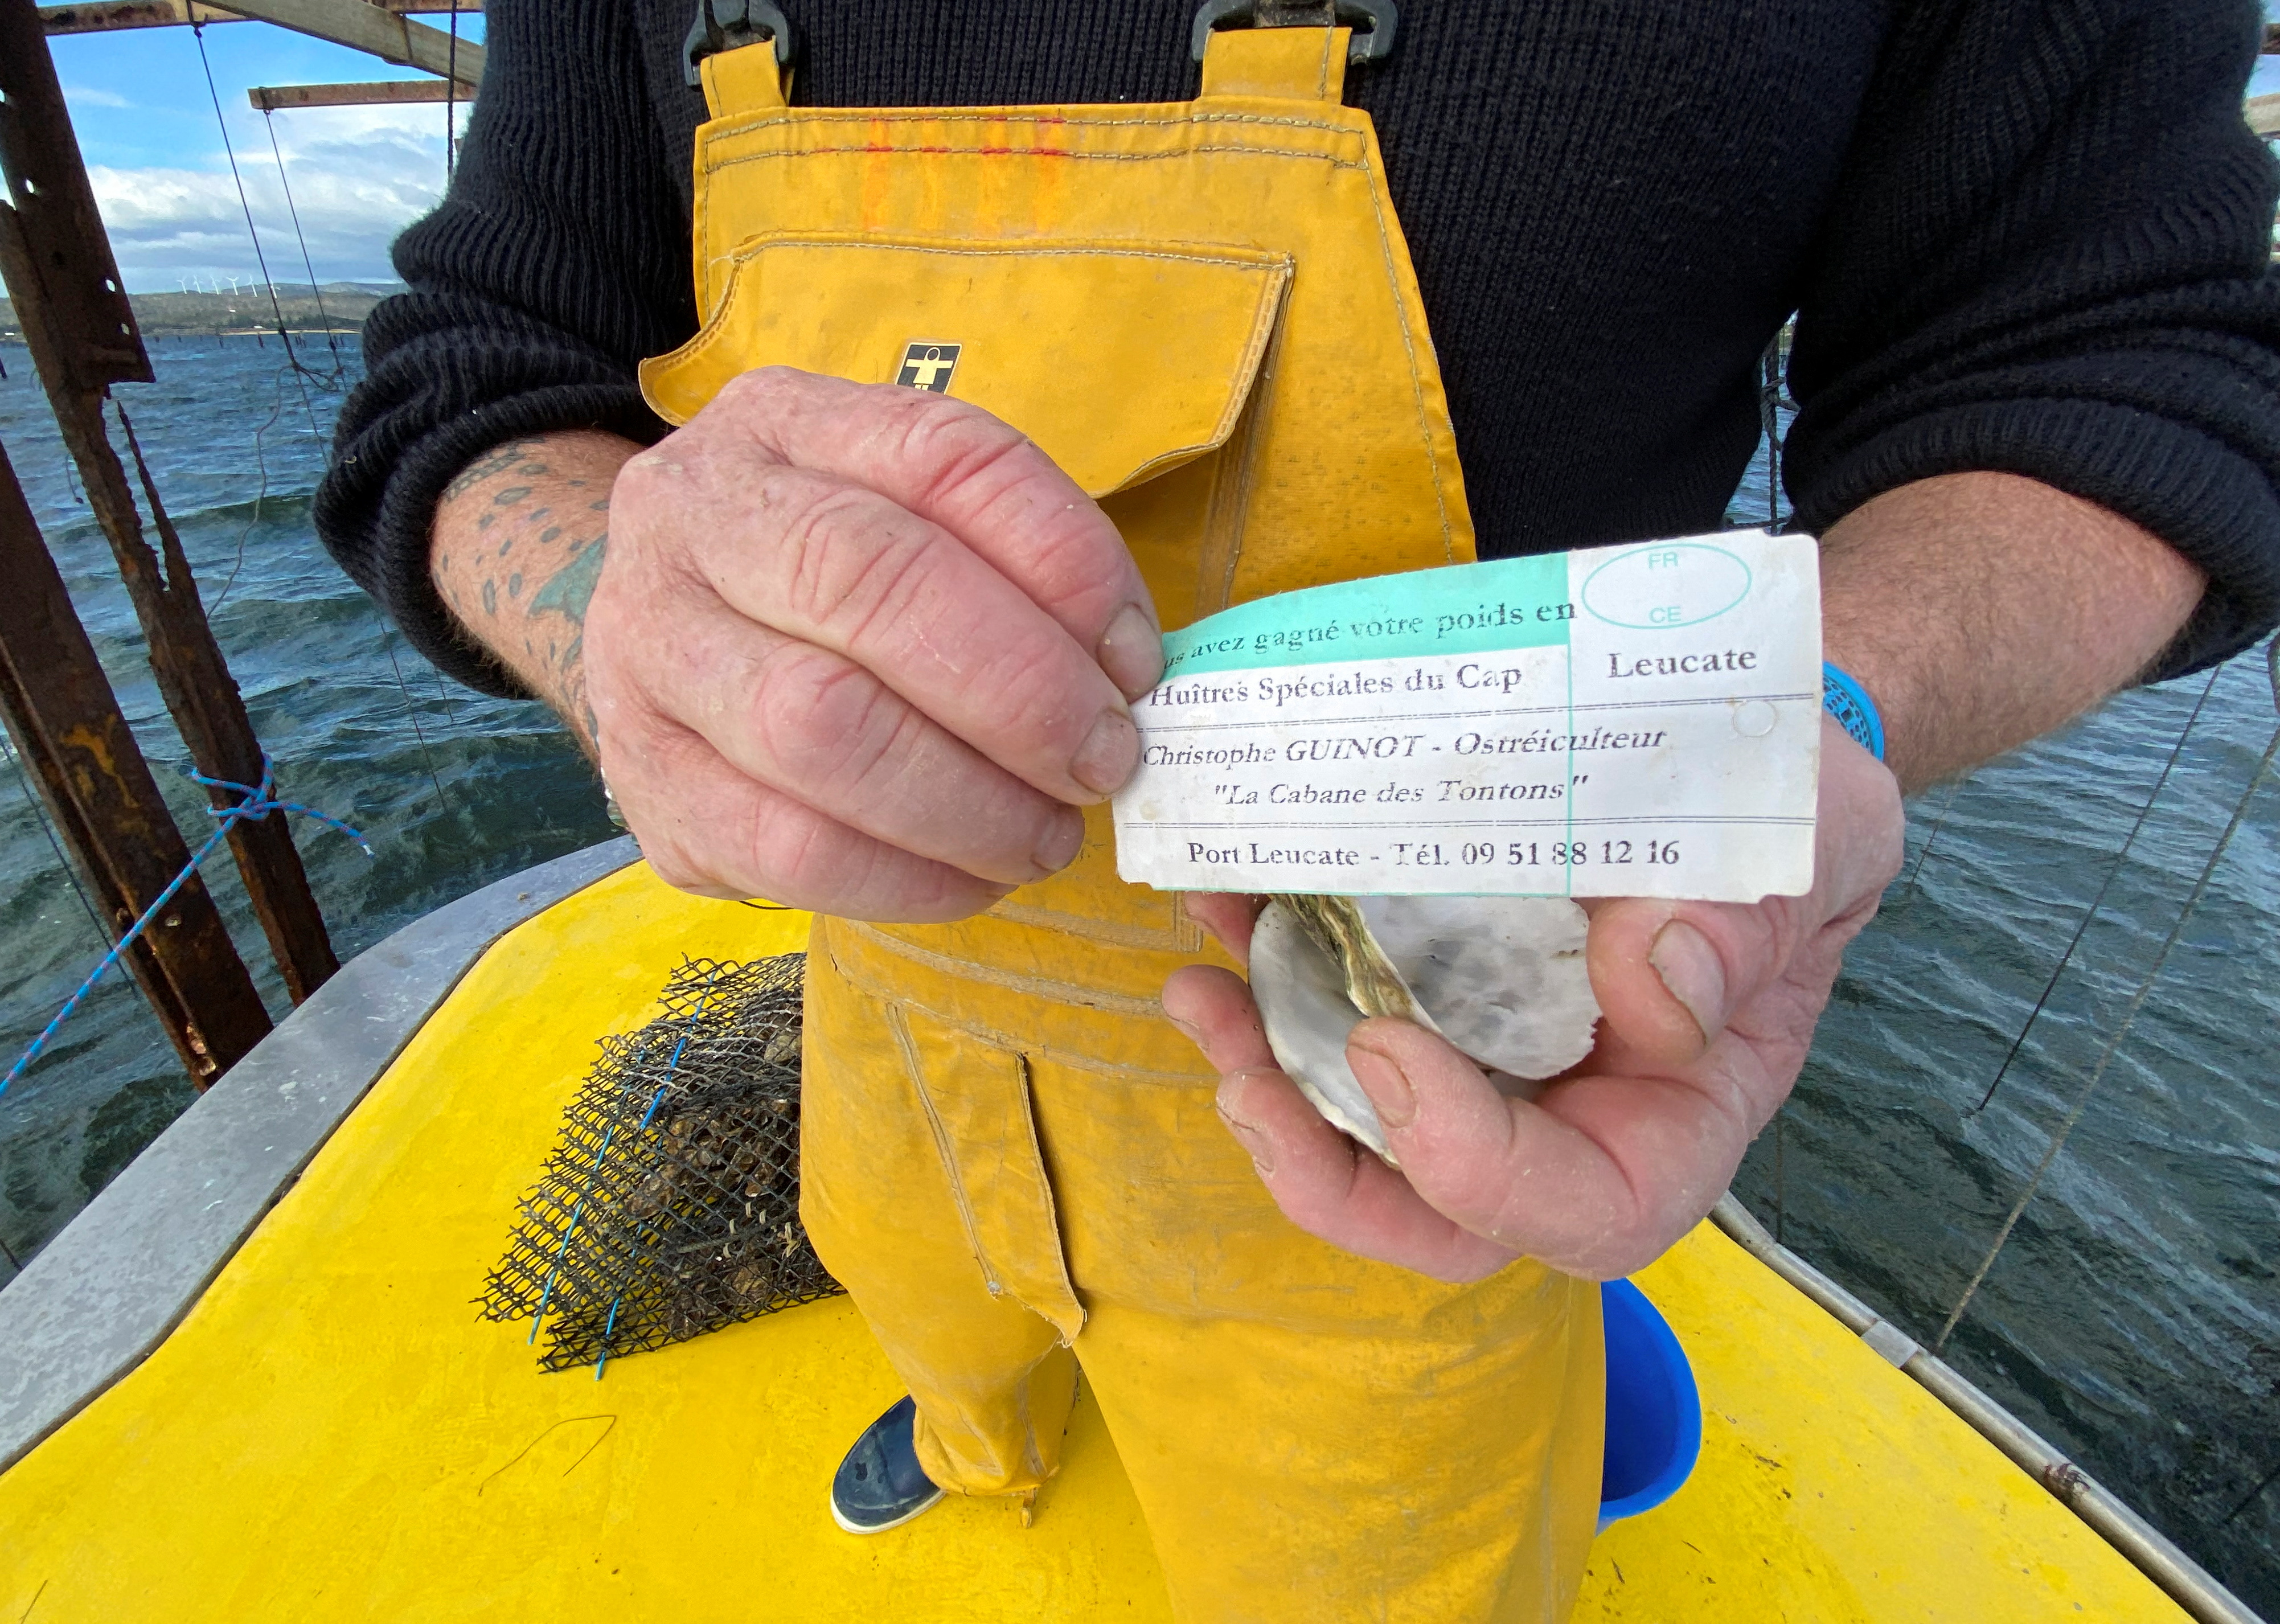 French oyster farmer leaves notes in empty shells to warn off thieves